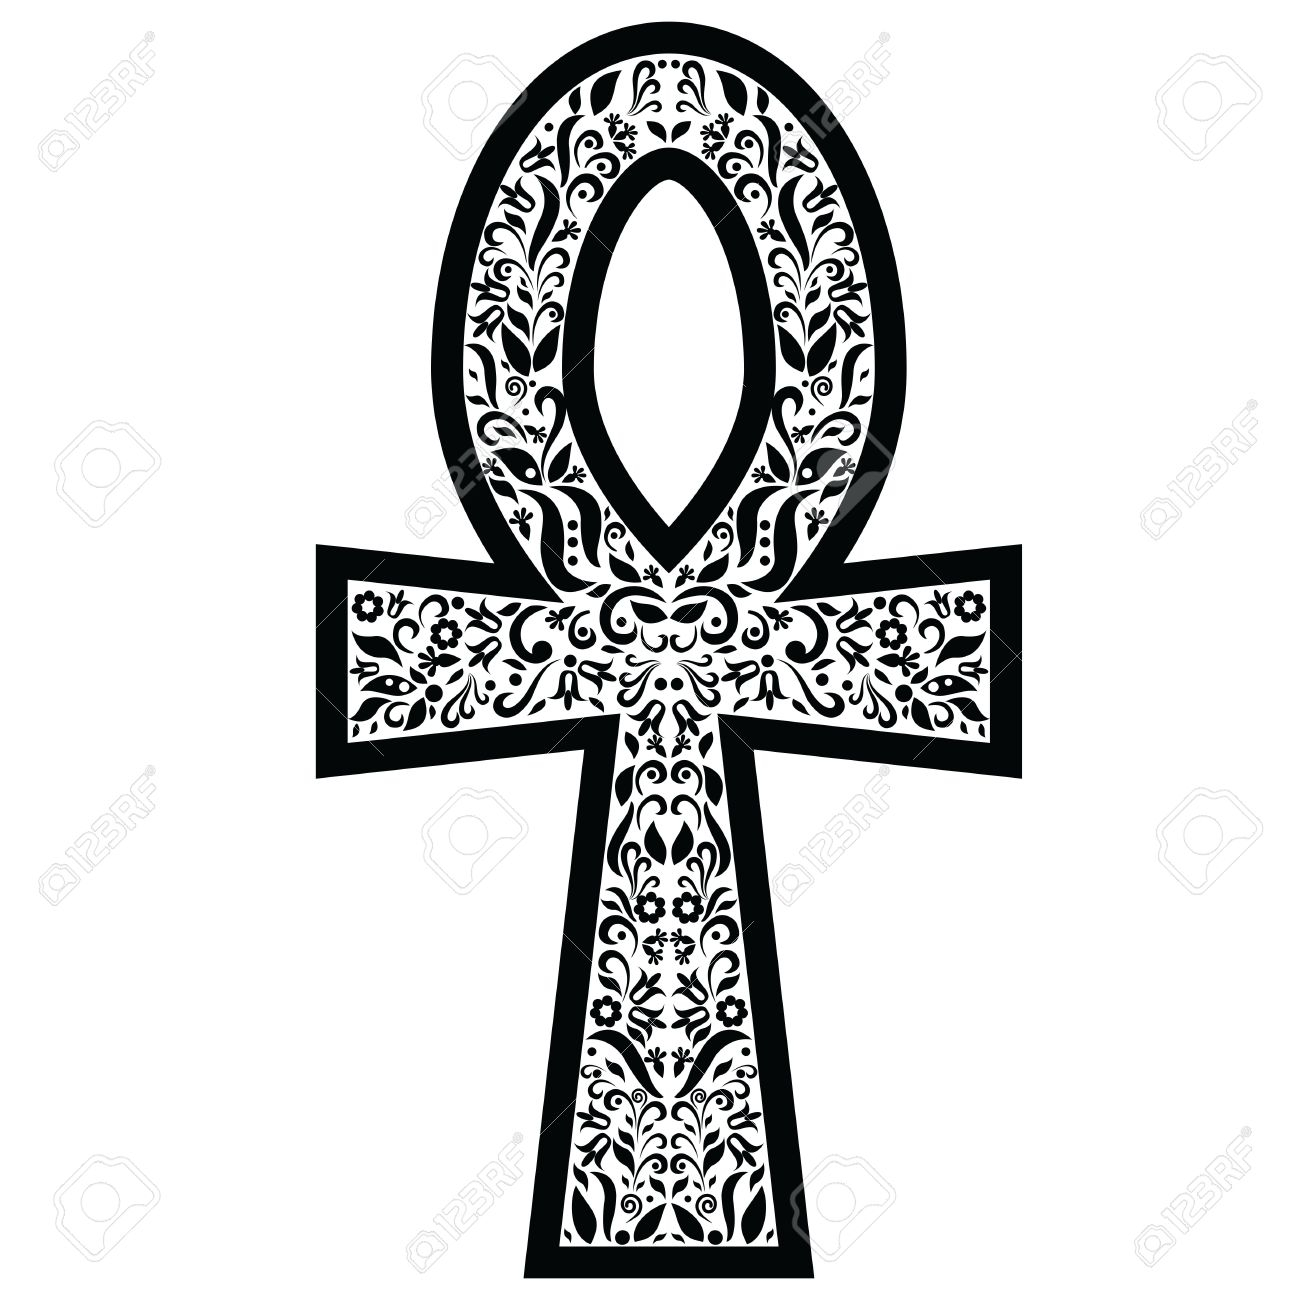 Ankh Cross With Floral Elements In Black And White Tattoo Style intended for size 1300 X 1300